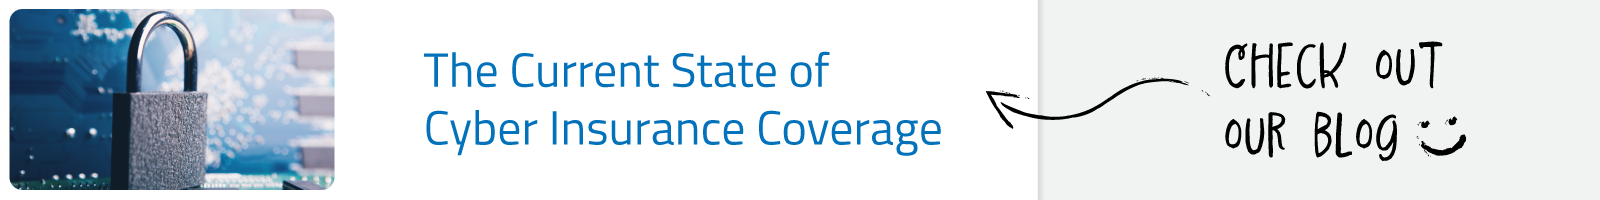 Cyber-Insurance-Blog-snippet_The-Current-State-of-Cyber-Insurance-Coverage